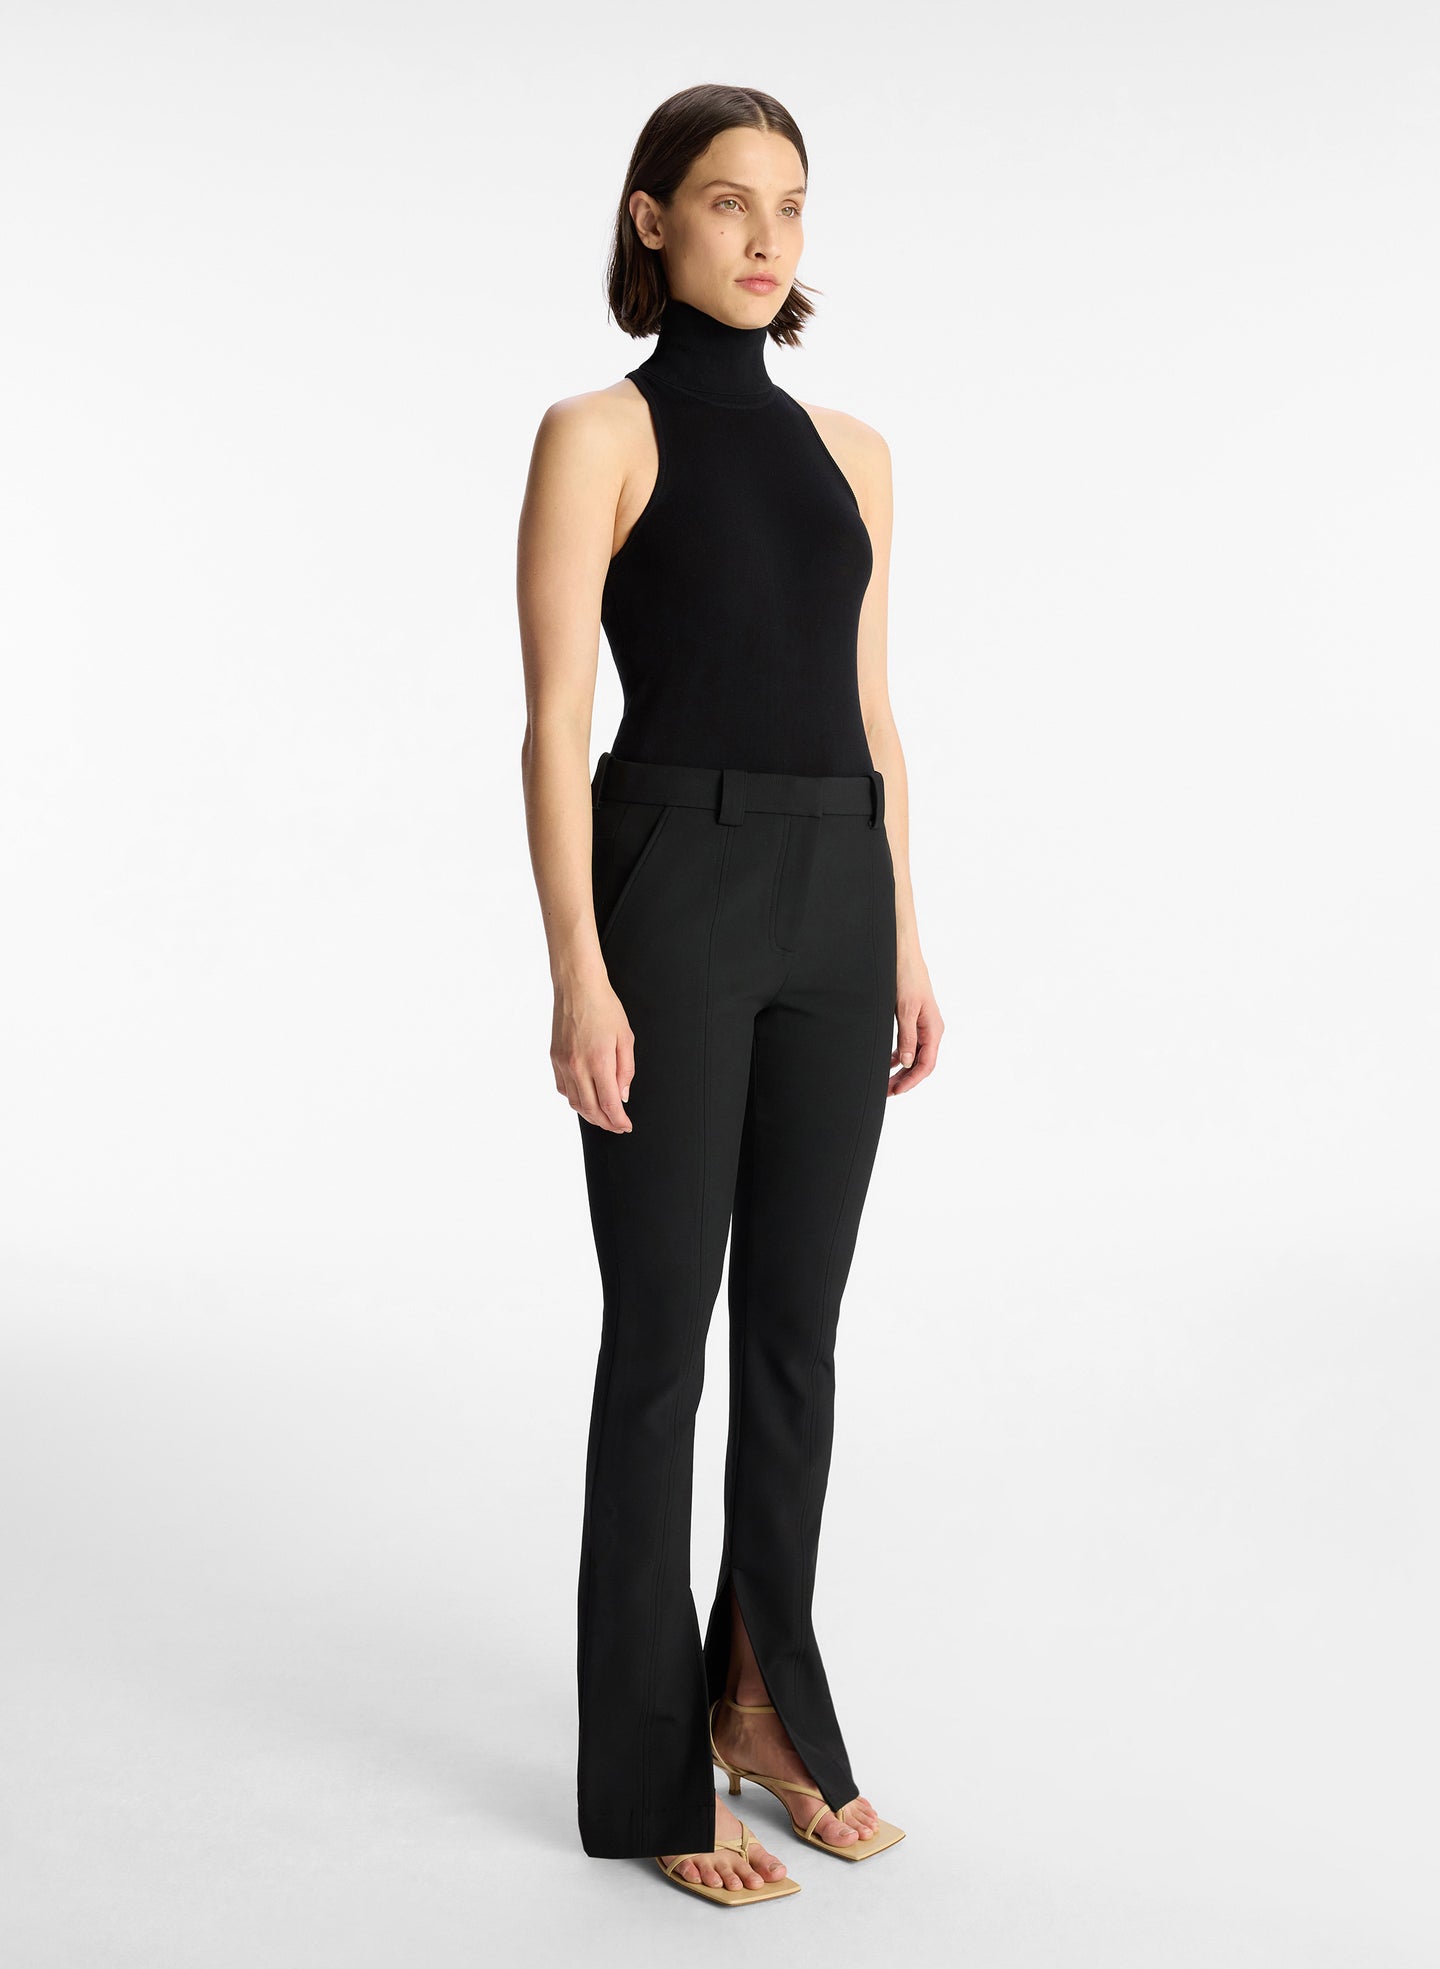 side view of woman wearing black sleeveless turtleneck top and black pants